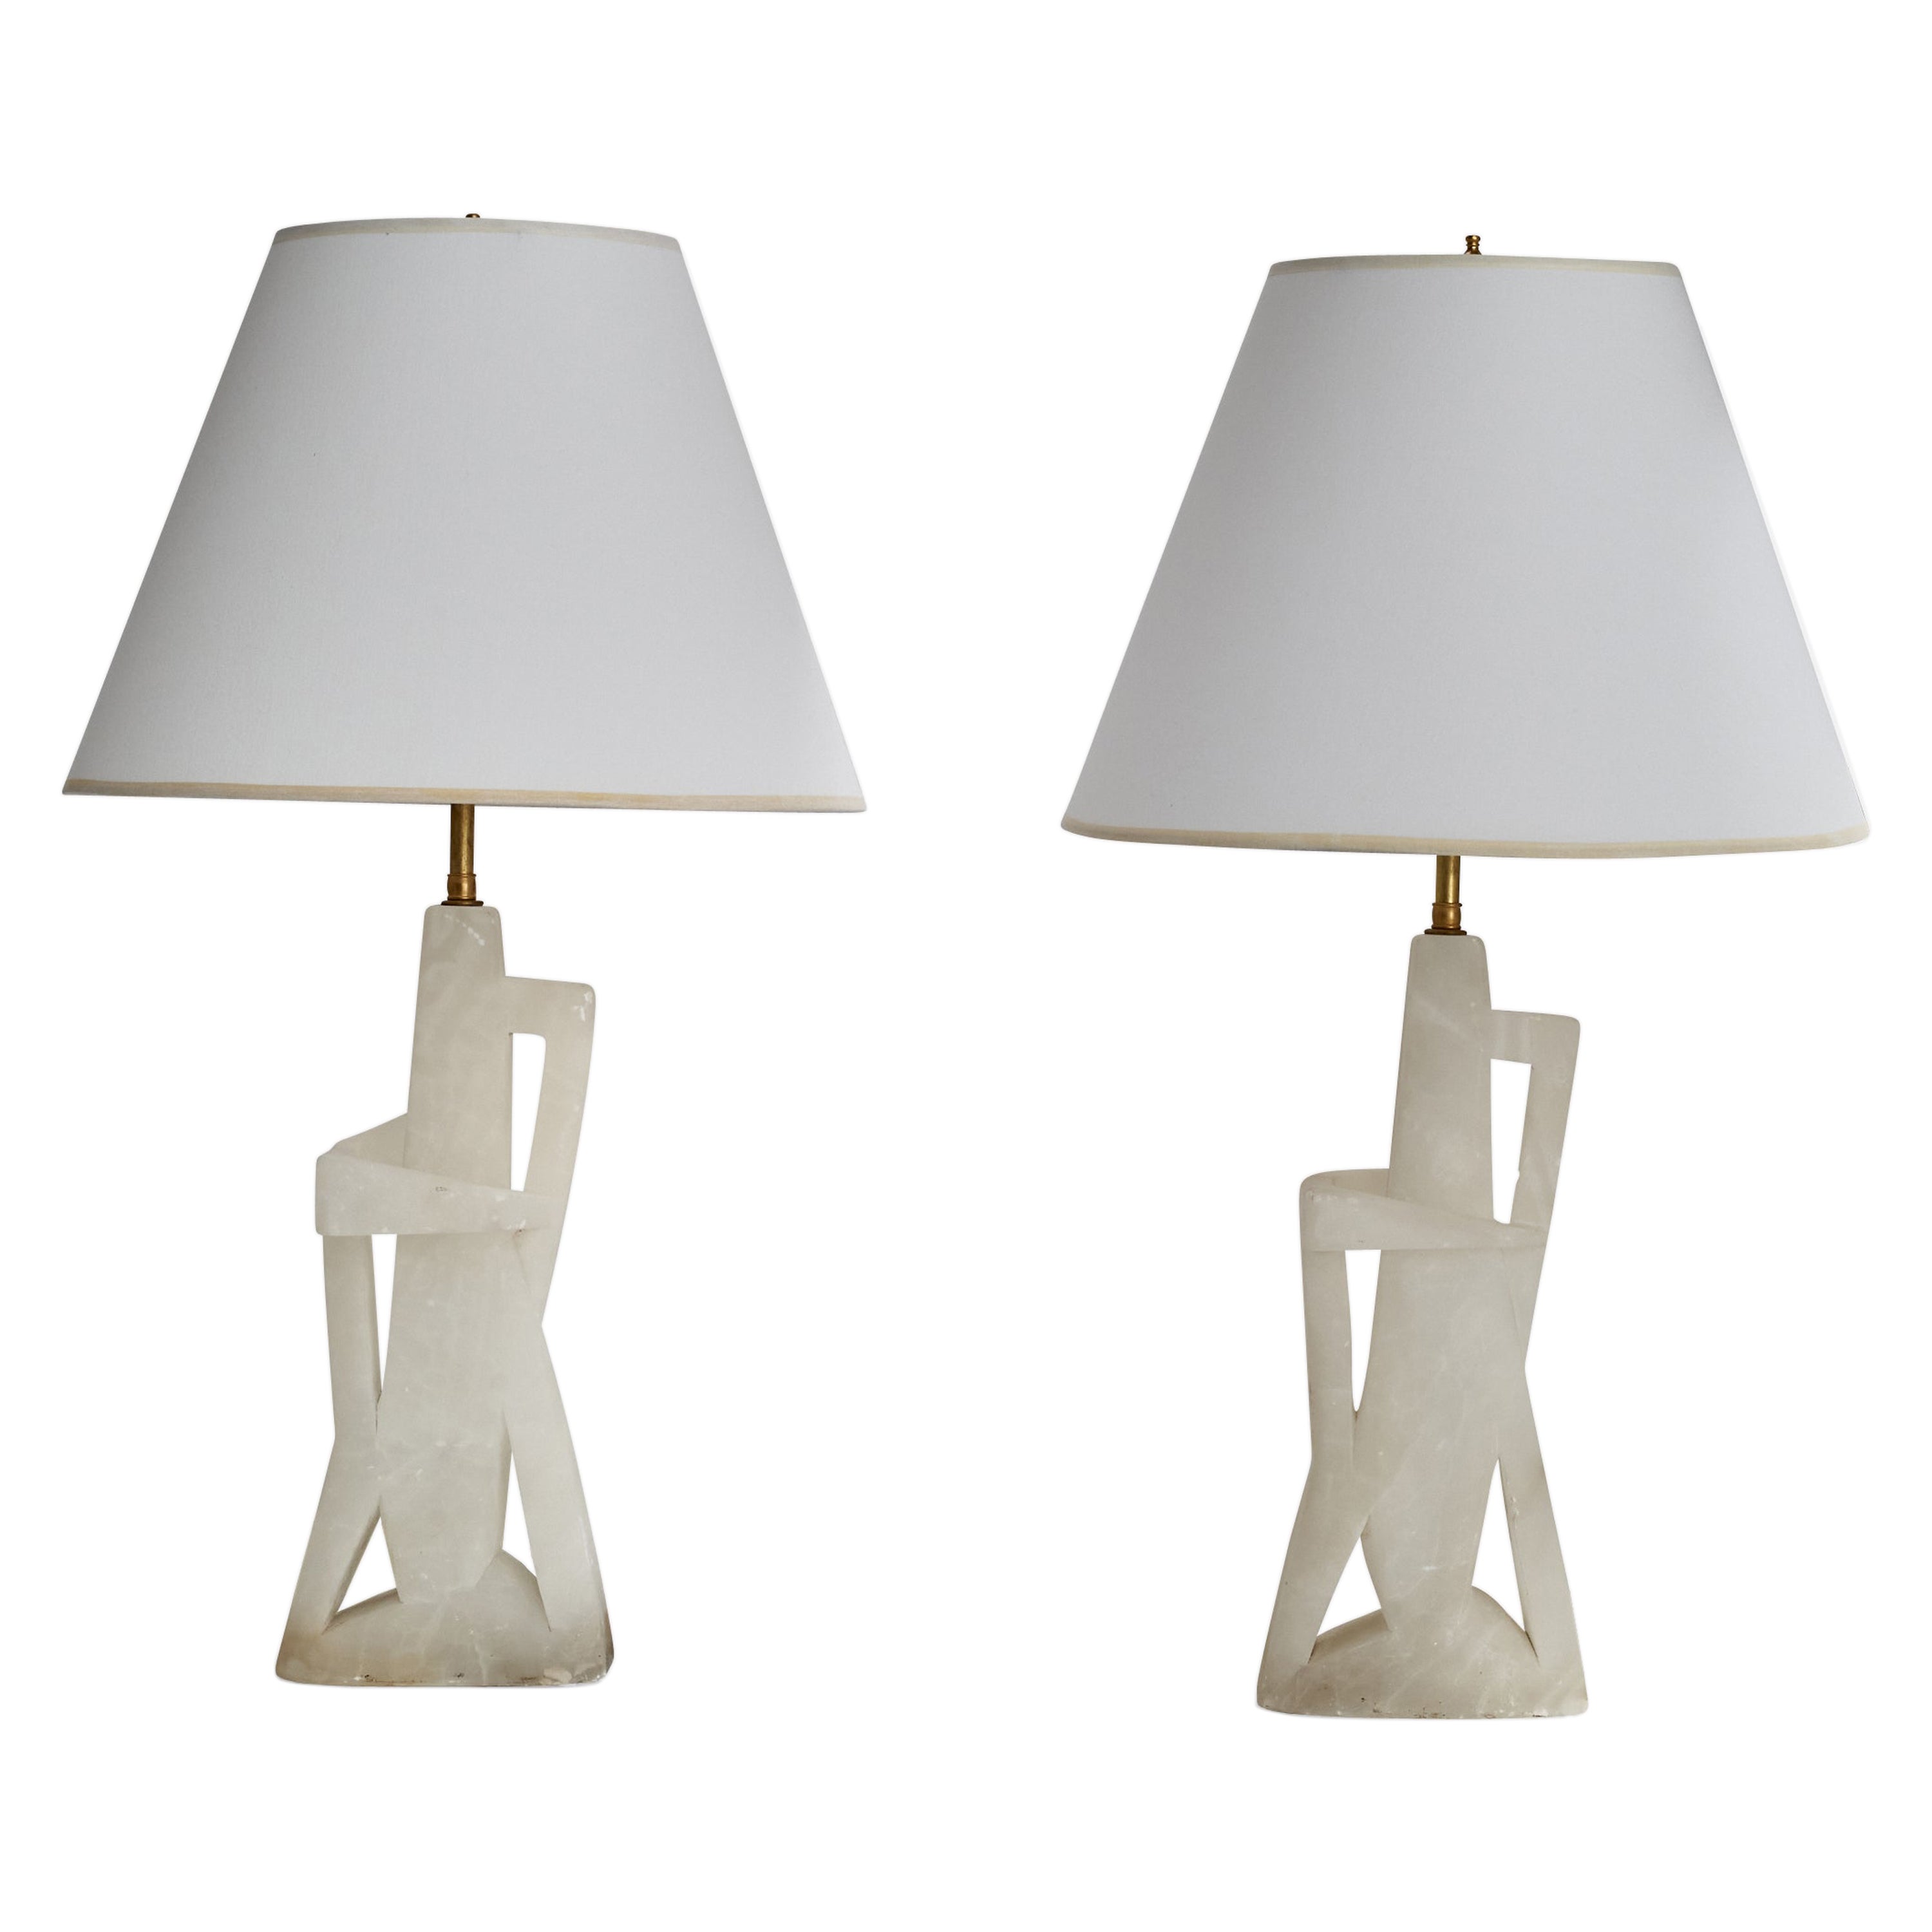 Maurizio Tempestini, Table Lamps, Alabaster, Brass, Fabric, Italy, 1965 For Sale